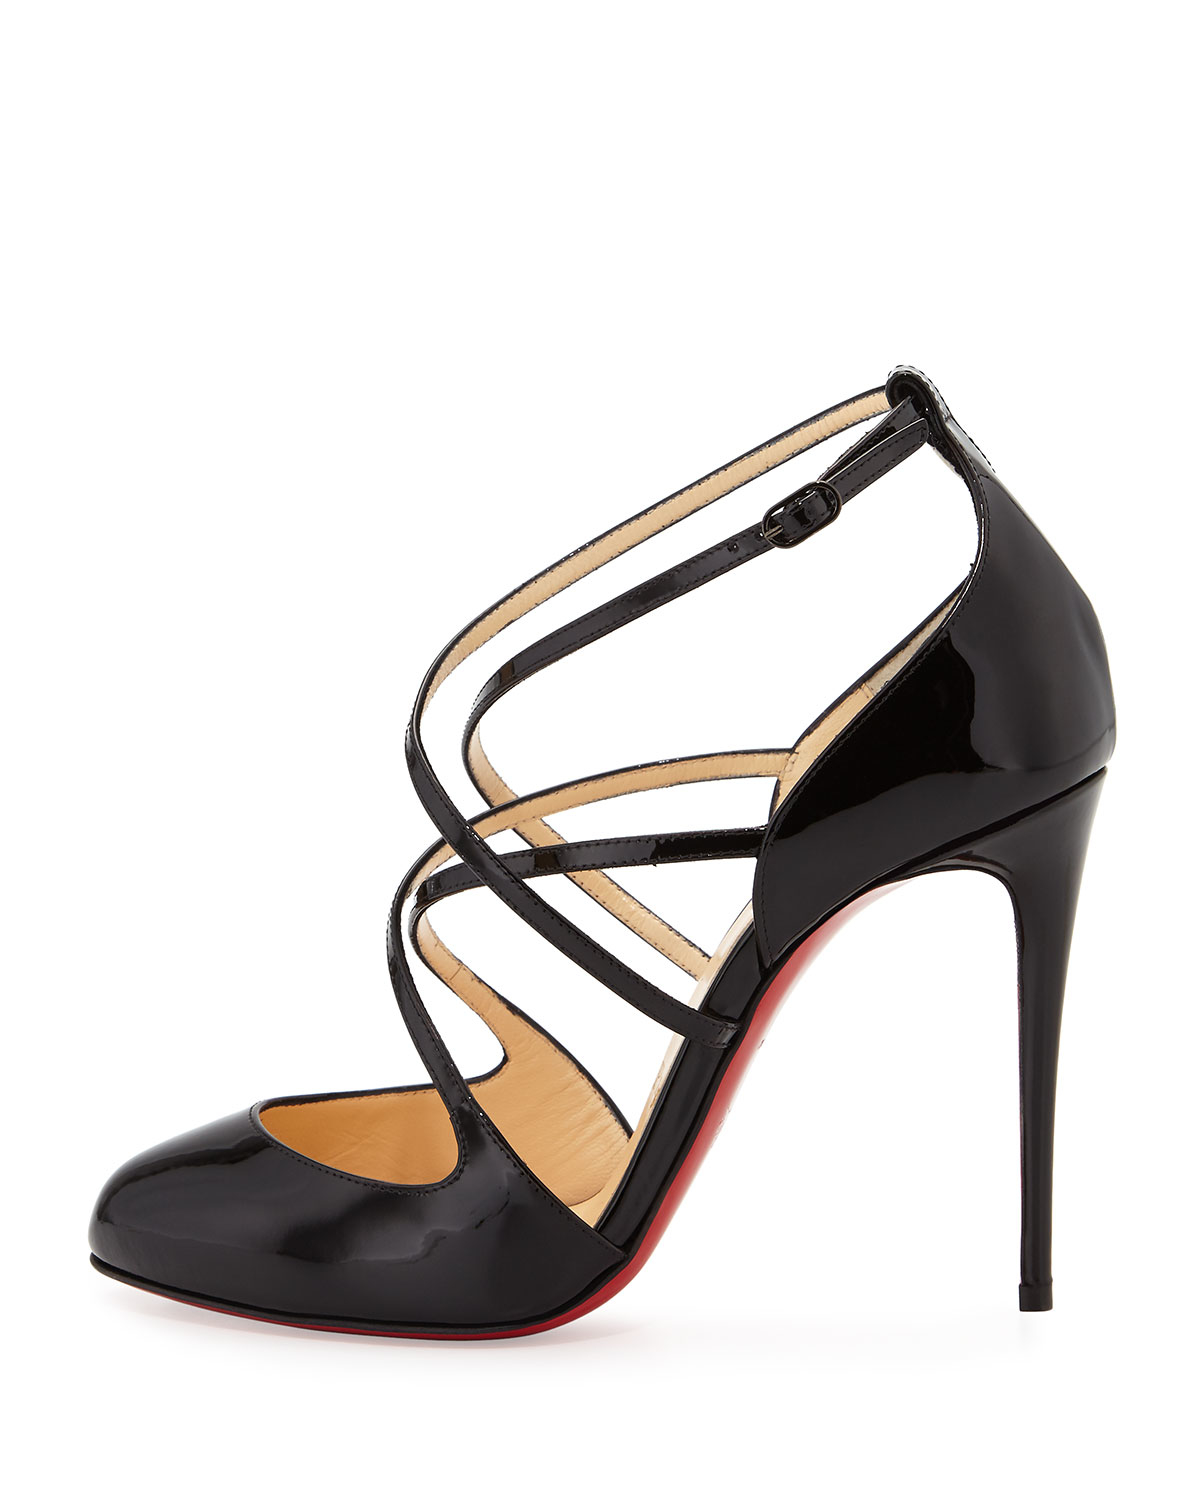 louis vuitton men loafer - Christian louboutin Soustelissimo Patent-Leather Pumps in Black | Lyst